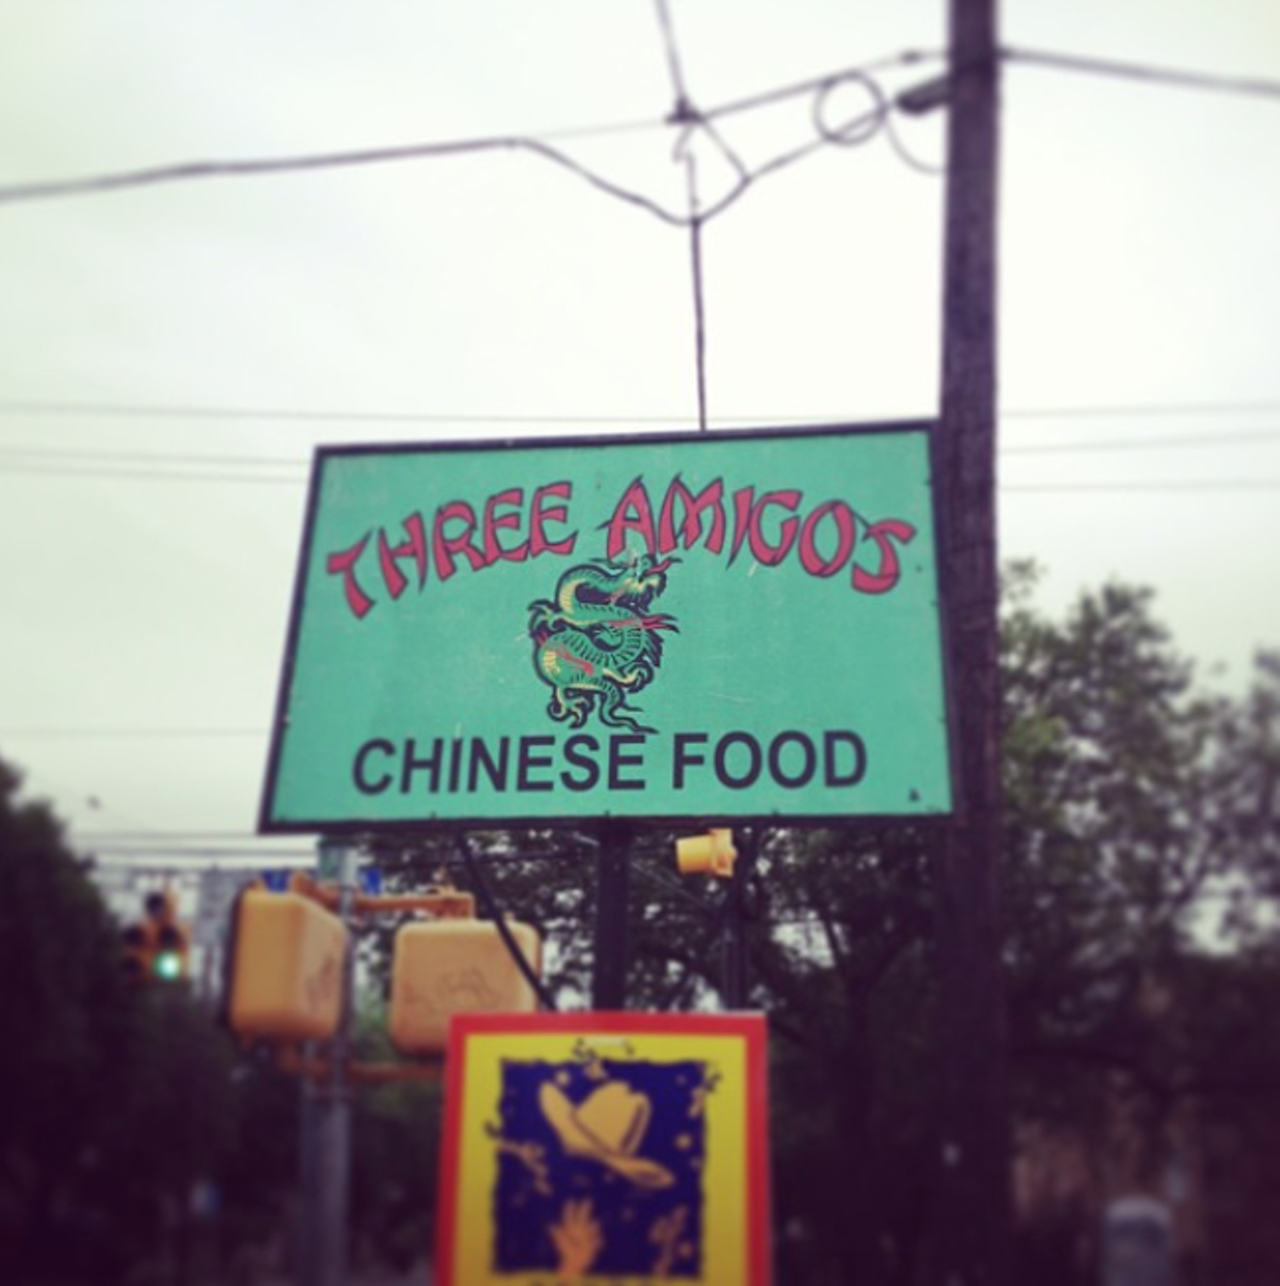 Three Amigos Grocery
303 NW 36th Street, (210) 436-0685
Aka Three Amigos Chinese Restaurant … what?! Trust us, don’t knock it ‘til you try it. This hidden gem is a Westside favorite, with the ever-popular pineapple chicken. Go. Now.
Photo via tito3000 / Instagram